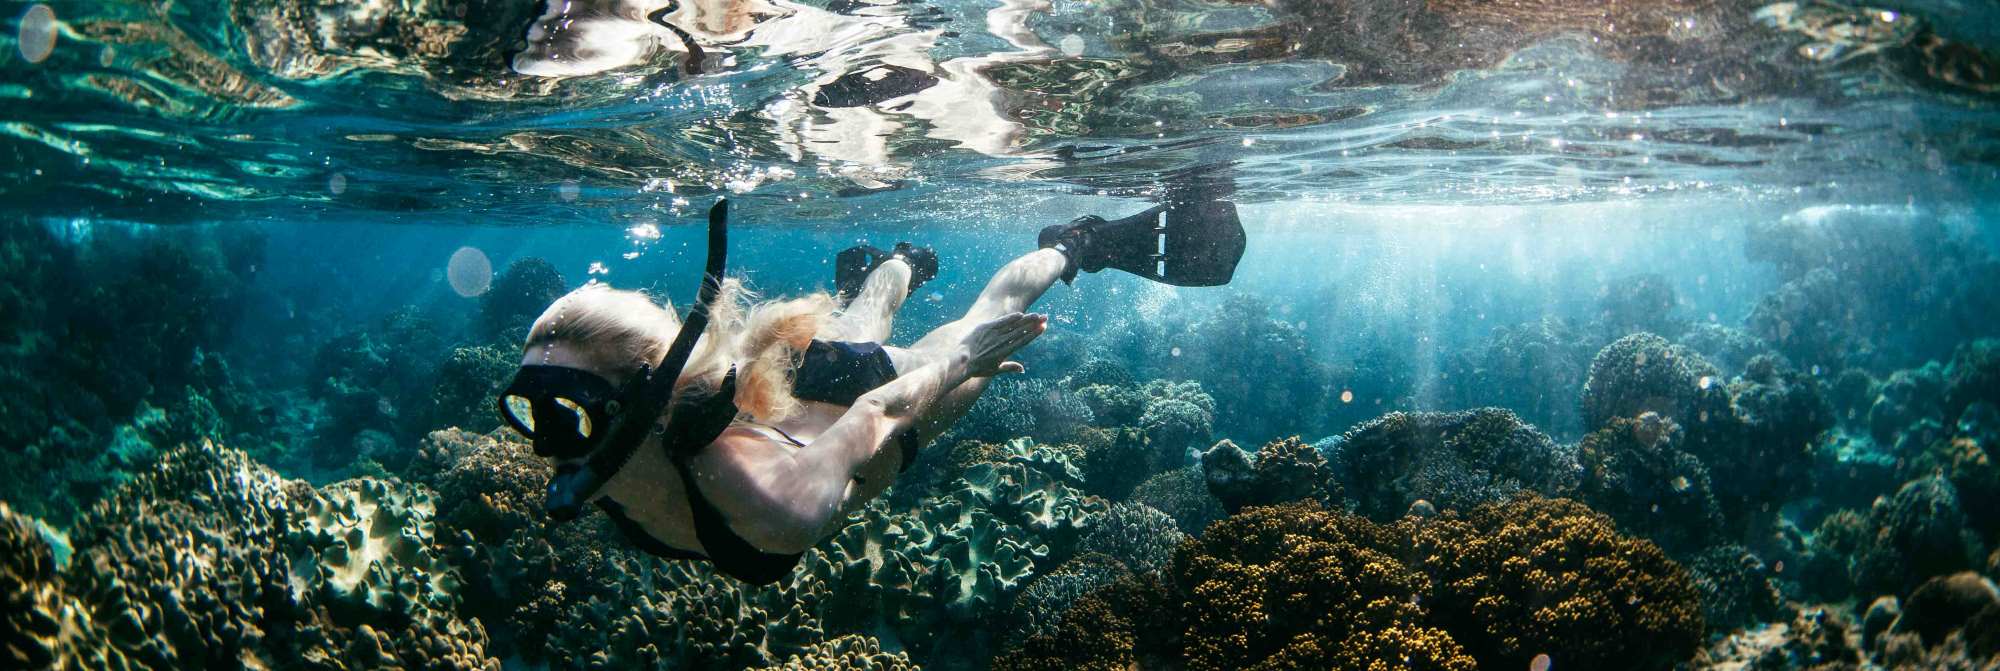 Woman snorkeling and swimming under the water in Apo Island in the Philippines